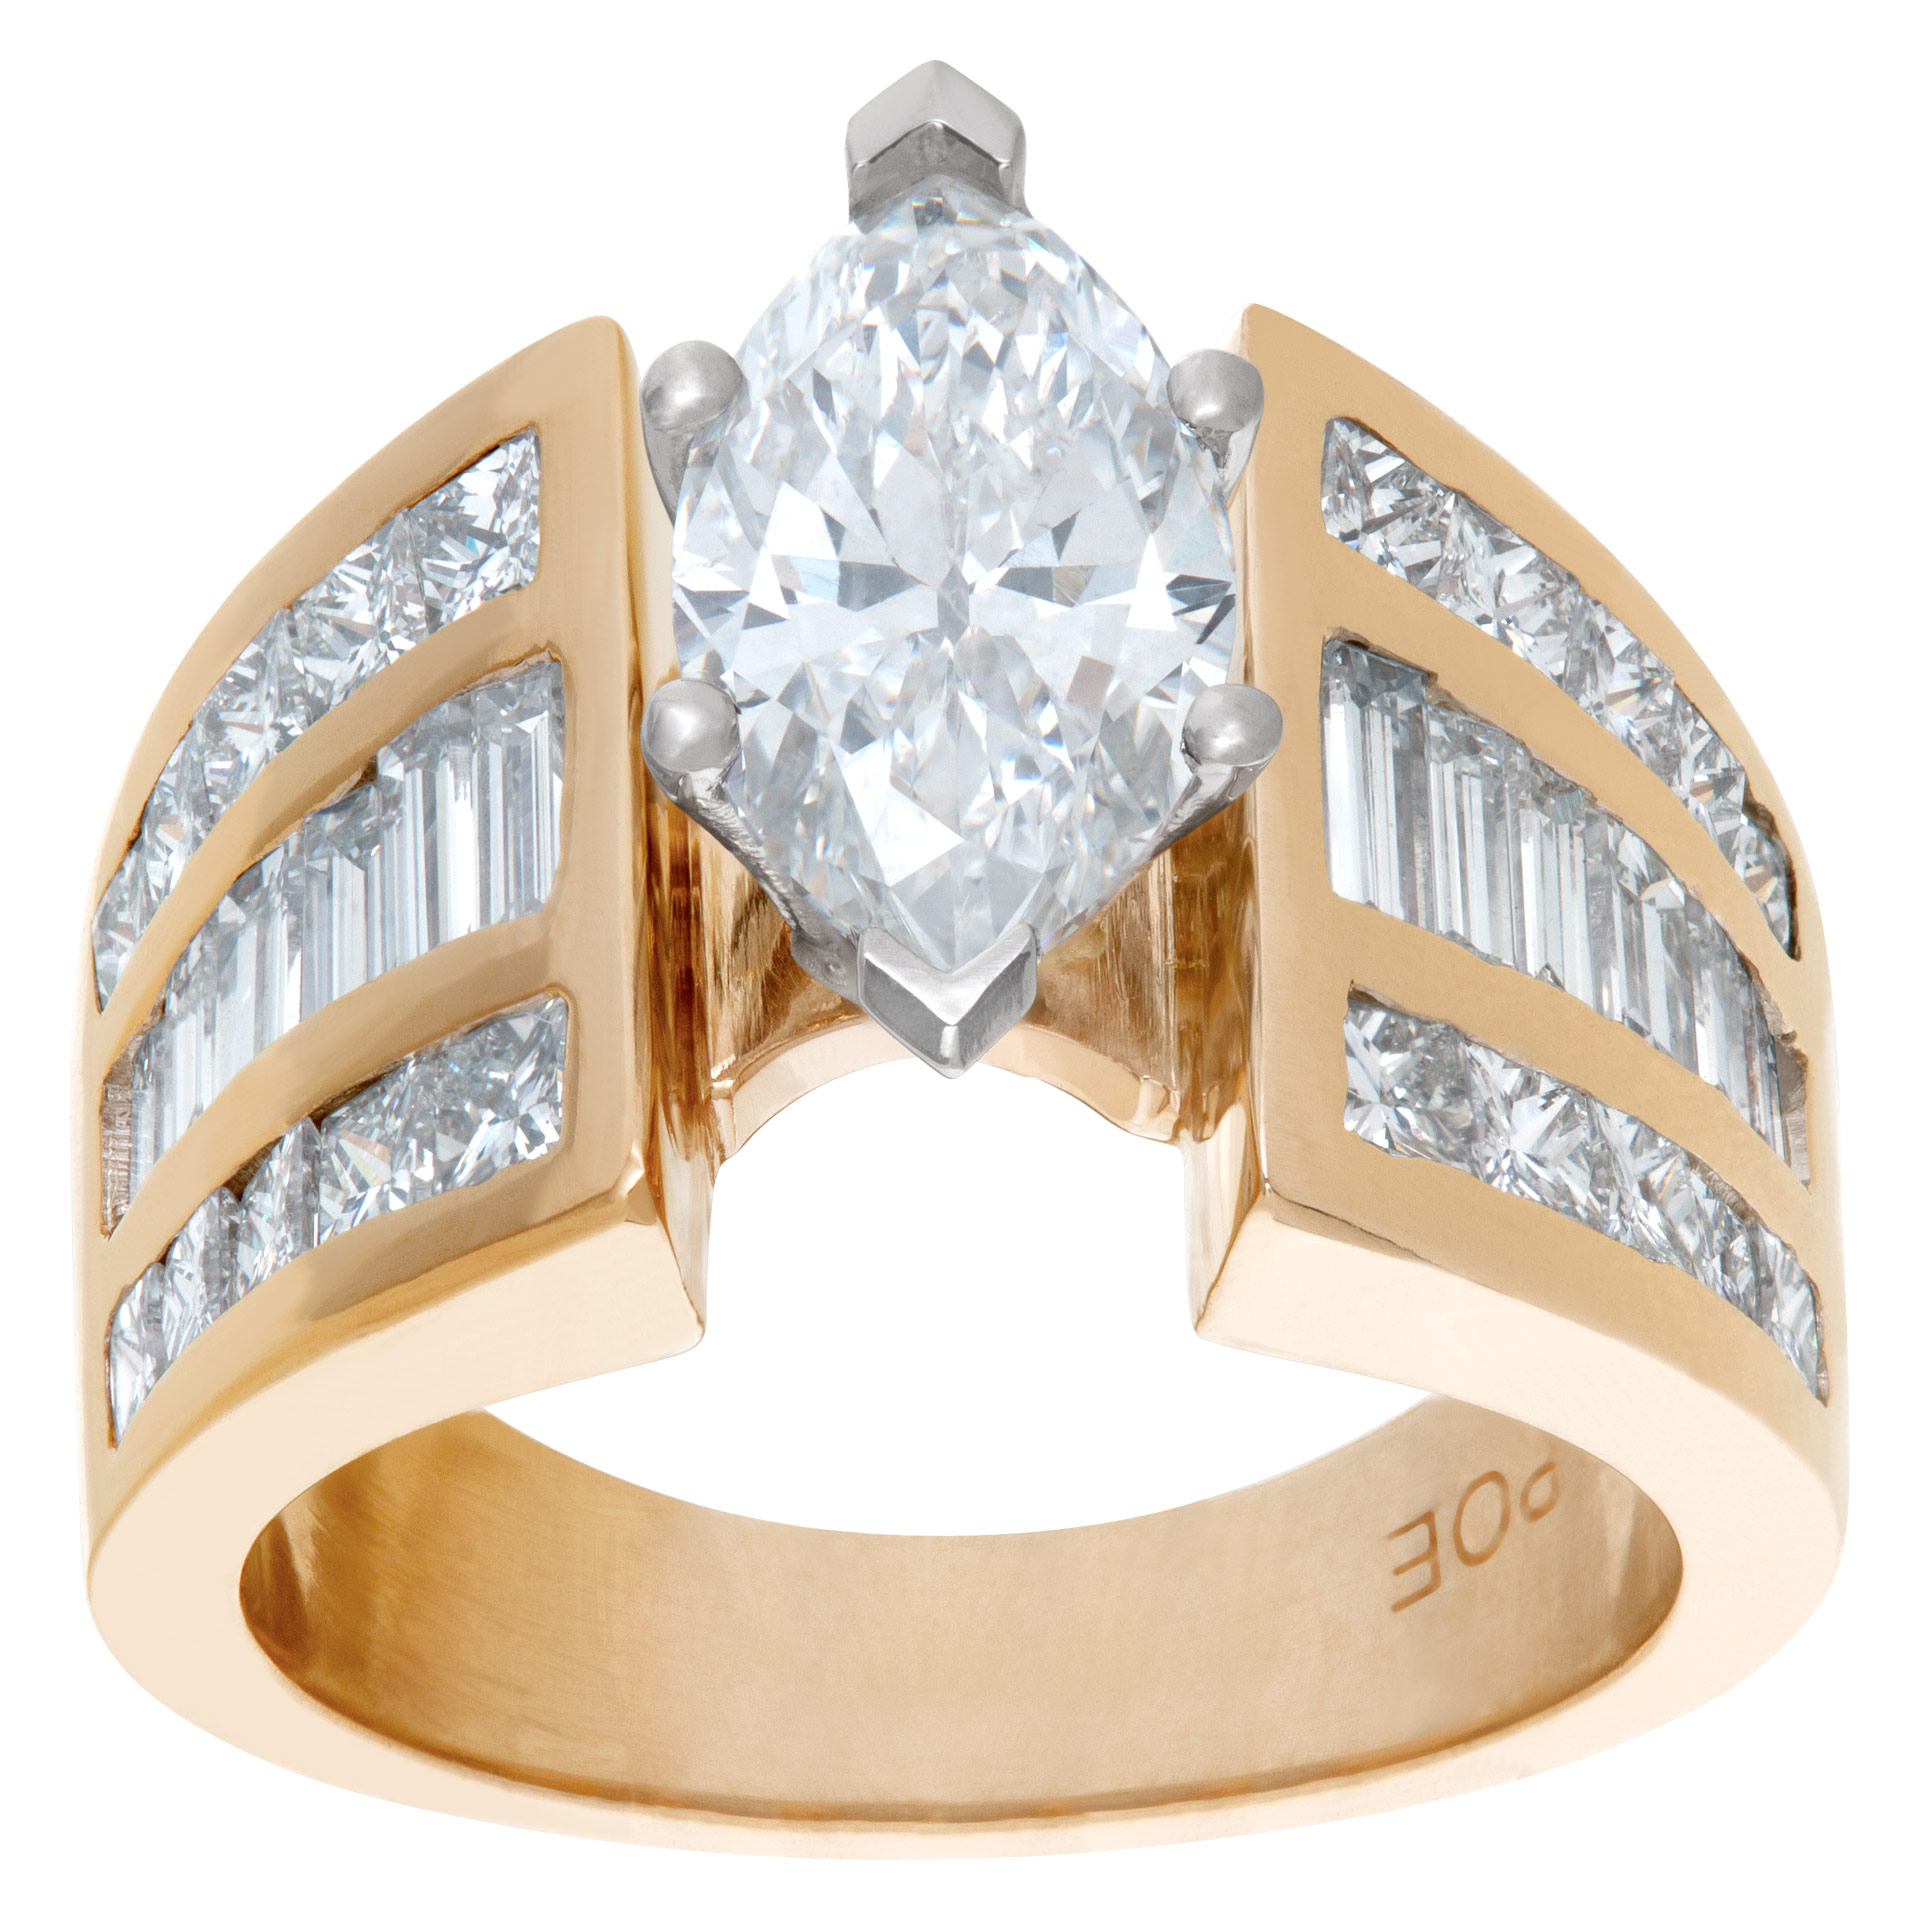 Marquise diamond 1.52 carats F Color, SI2 clarity in a 14k yellow gold and platinum setting with approx. 2 carats in side diamonds image 4